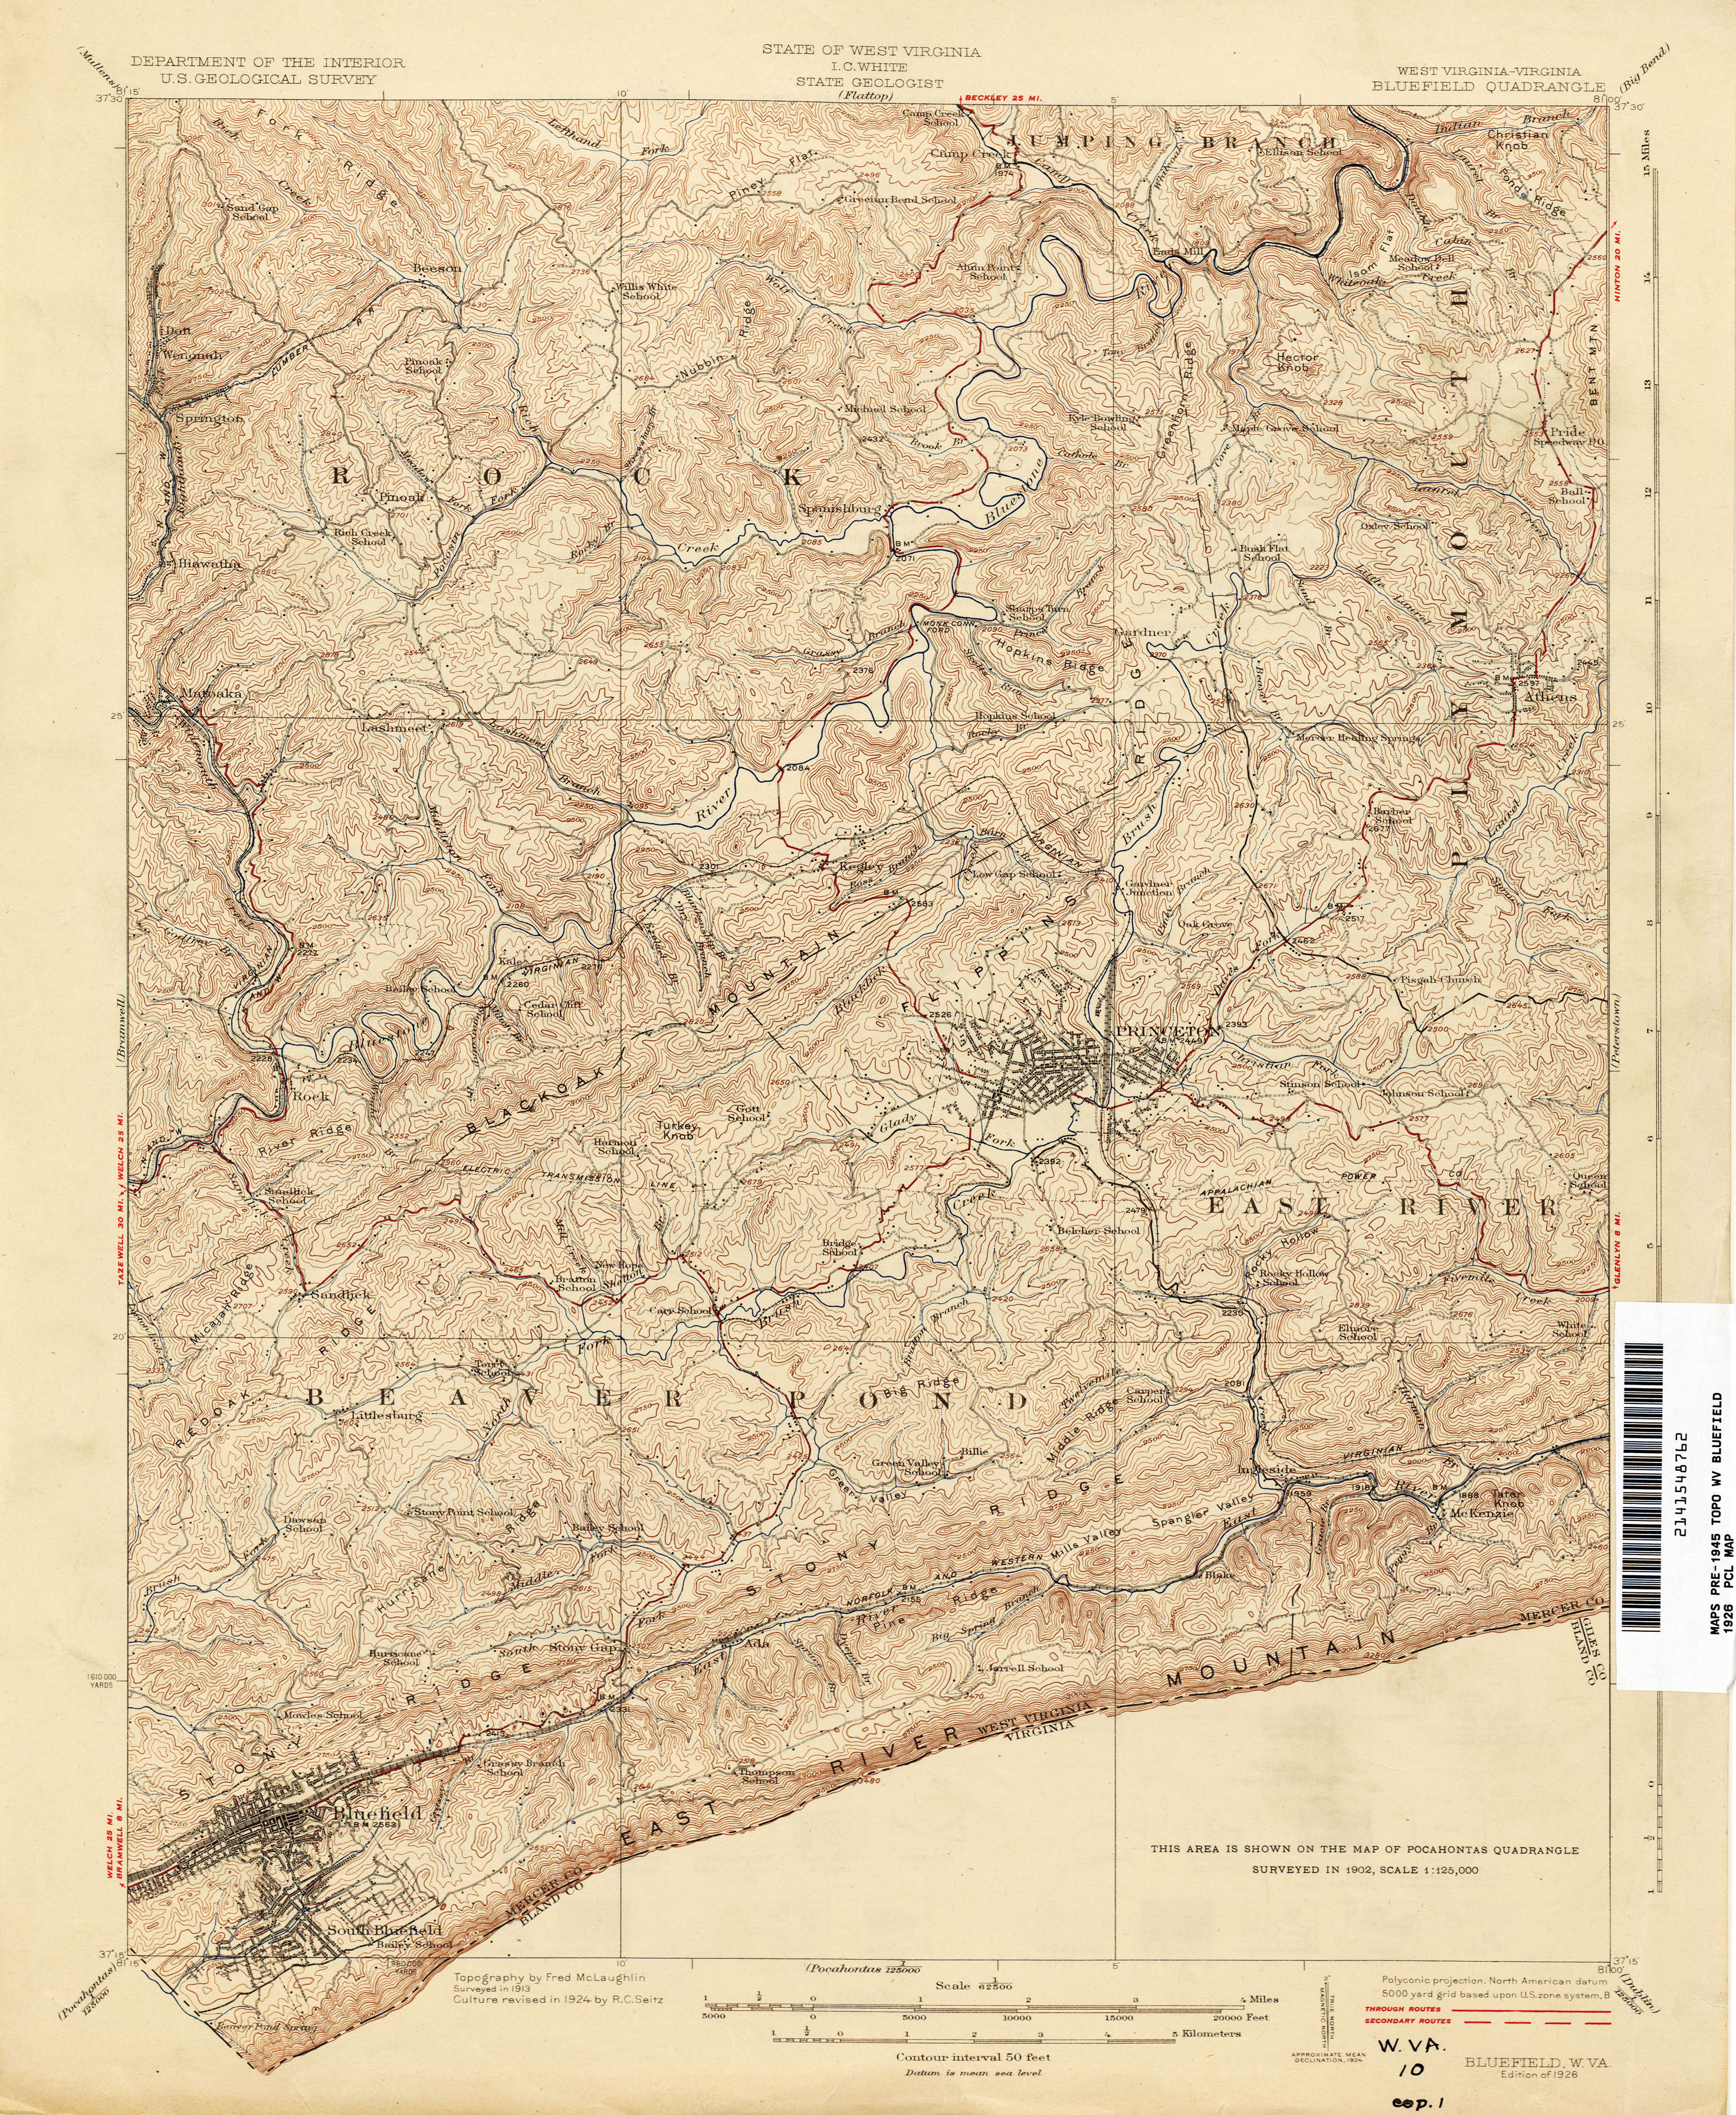 Panoramic map of Bluefield WV c1911 24x36 